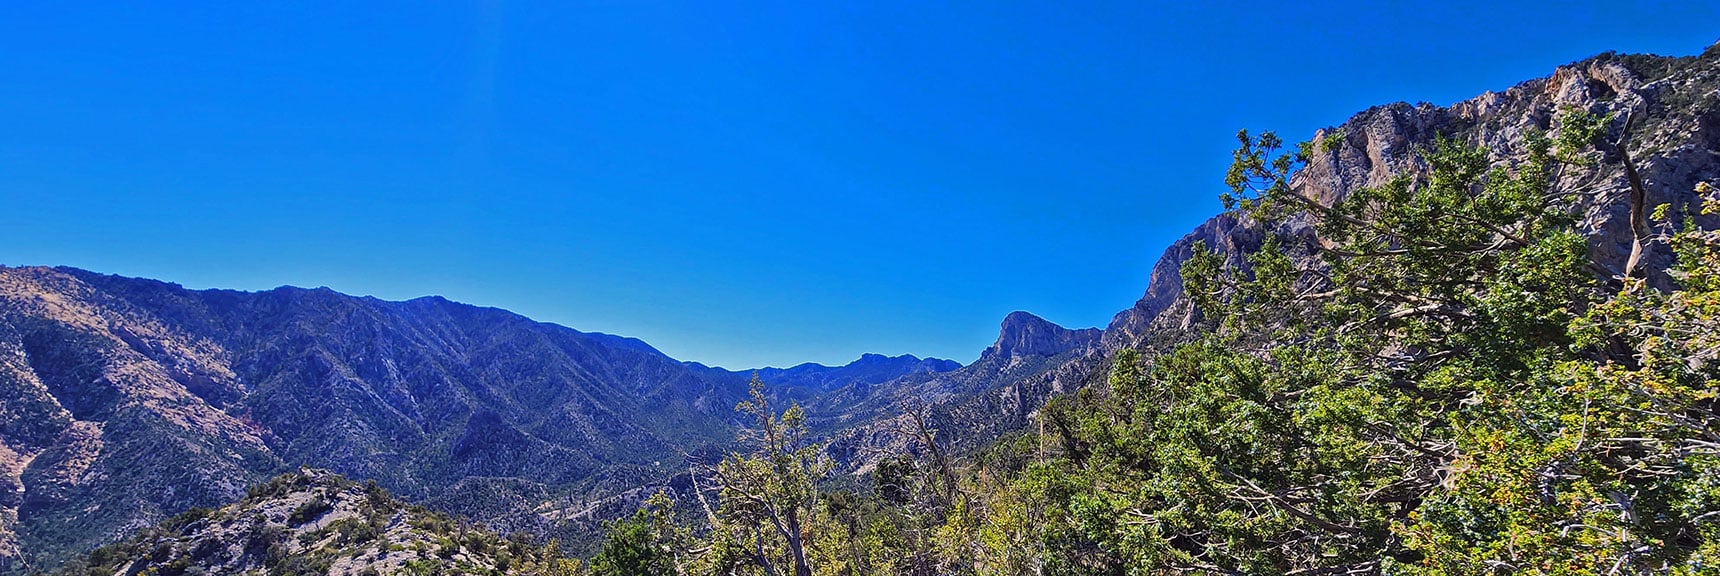 View Up Rocky Gap Road Canyon. Red Rock Summit Prominent on Right | Switchback Spring Ridge | Red Rock Canyon, Nevada